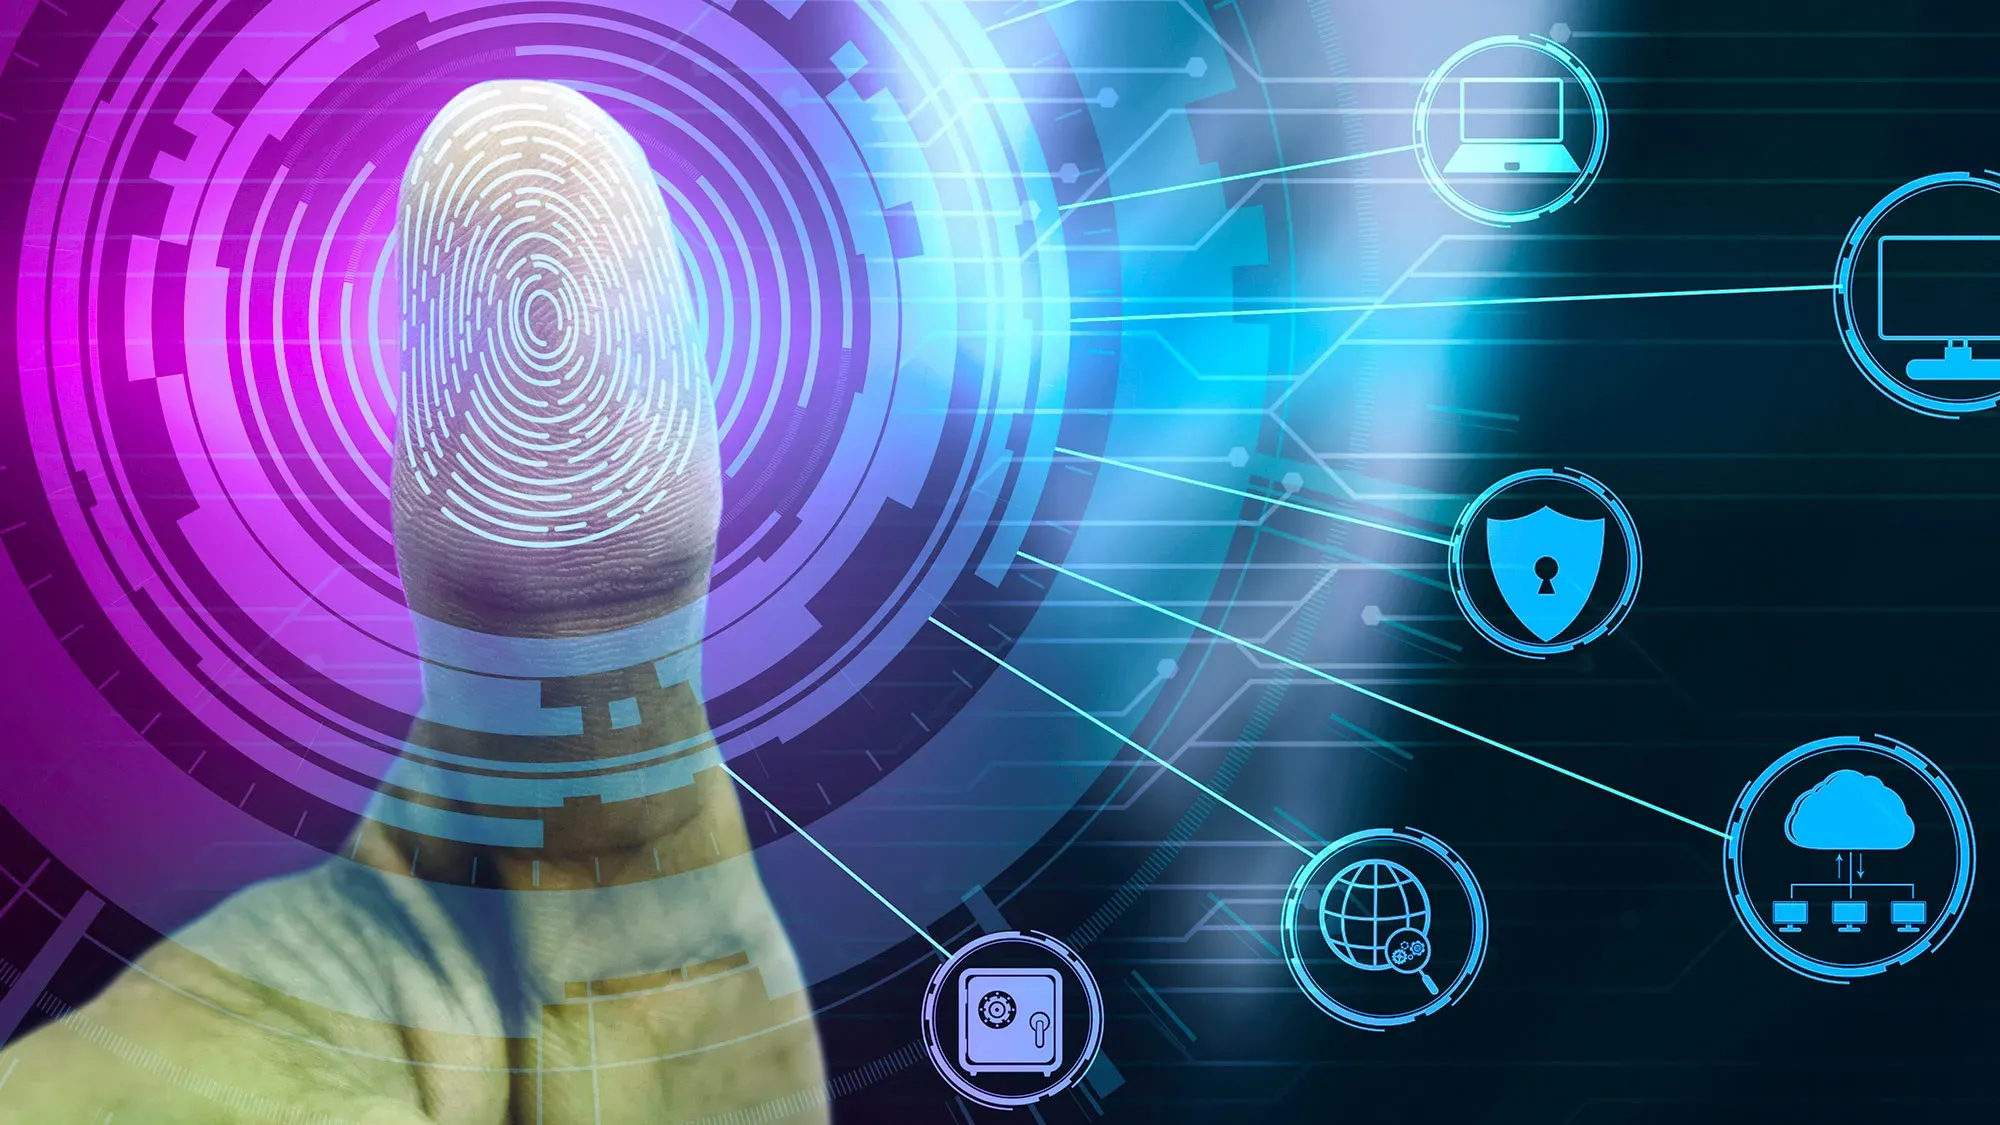 New Identity Verification Systems Aim to Protect Personal Data